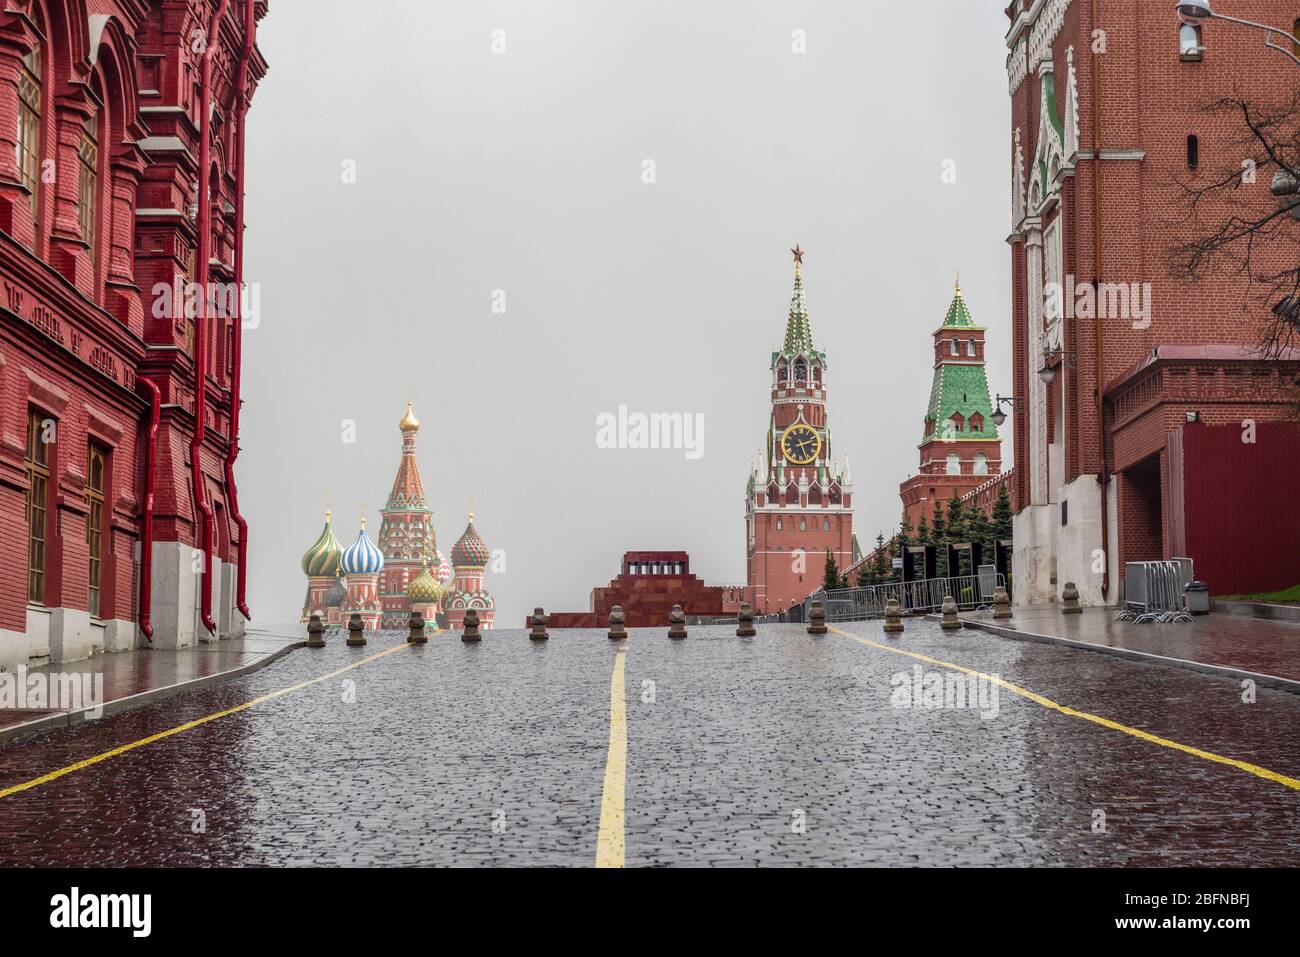 Russia April 19 High Resolution Stock Photography And Images Alamy - ru city of moscow russia roblox